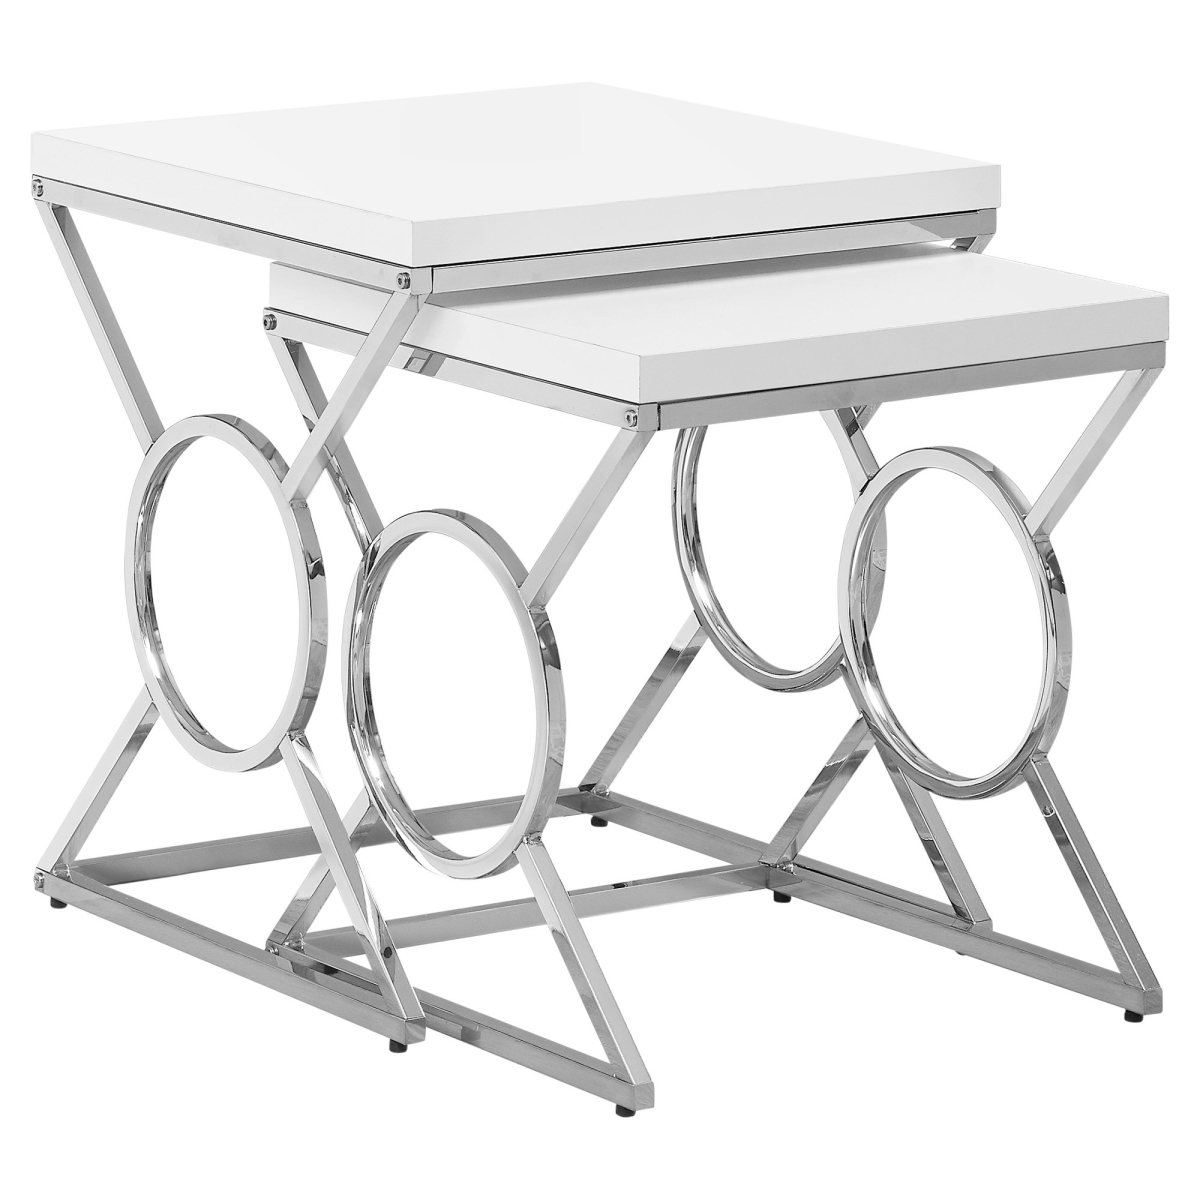 Picture of Monarch Specialties I 3401 Glossy White & Chrome Metal Nesting Table Set - 2 Piece